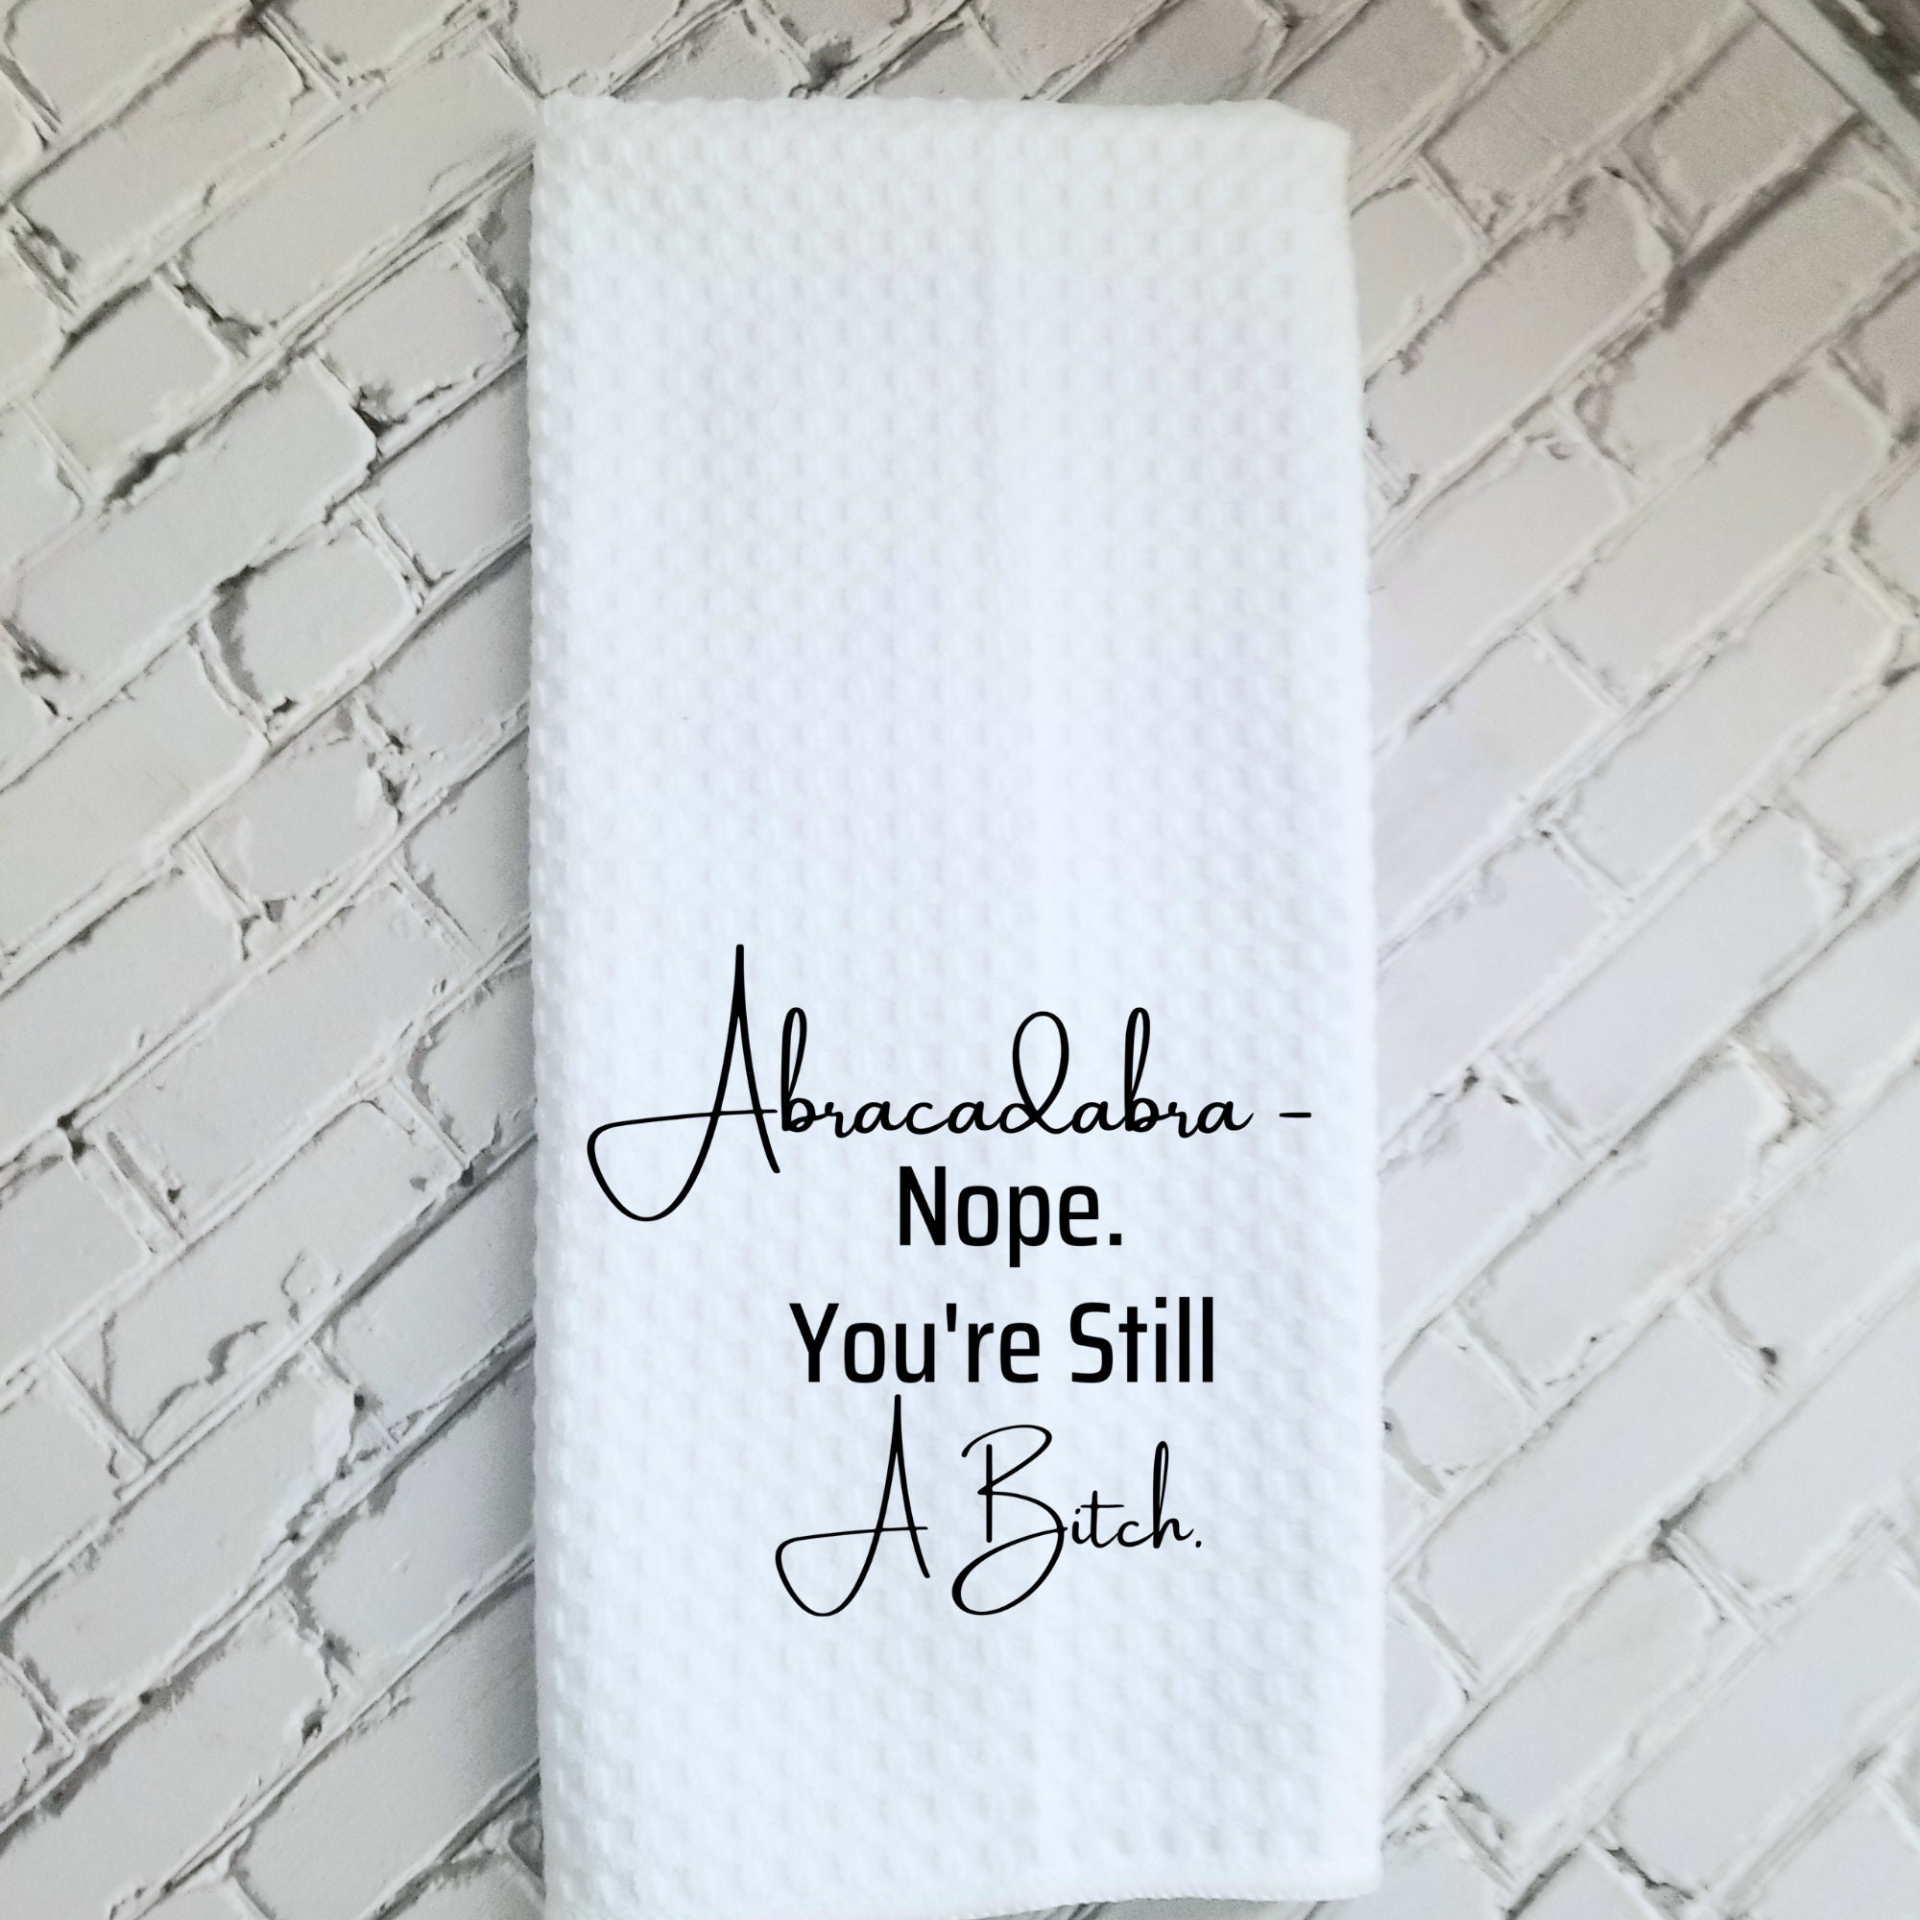 Abracadabra Nope You're Still A Bitch Dish Towel | Funny Kitchen Towel with Sarcastic Quote | Decorative Hand Towel for Housewarming Gift, Goodies N Stuff